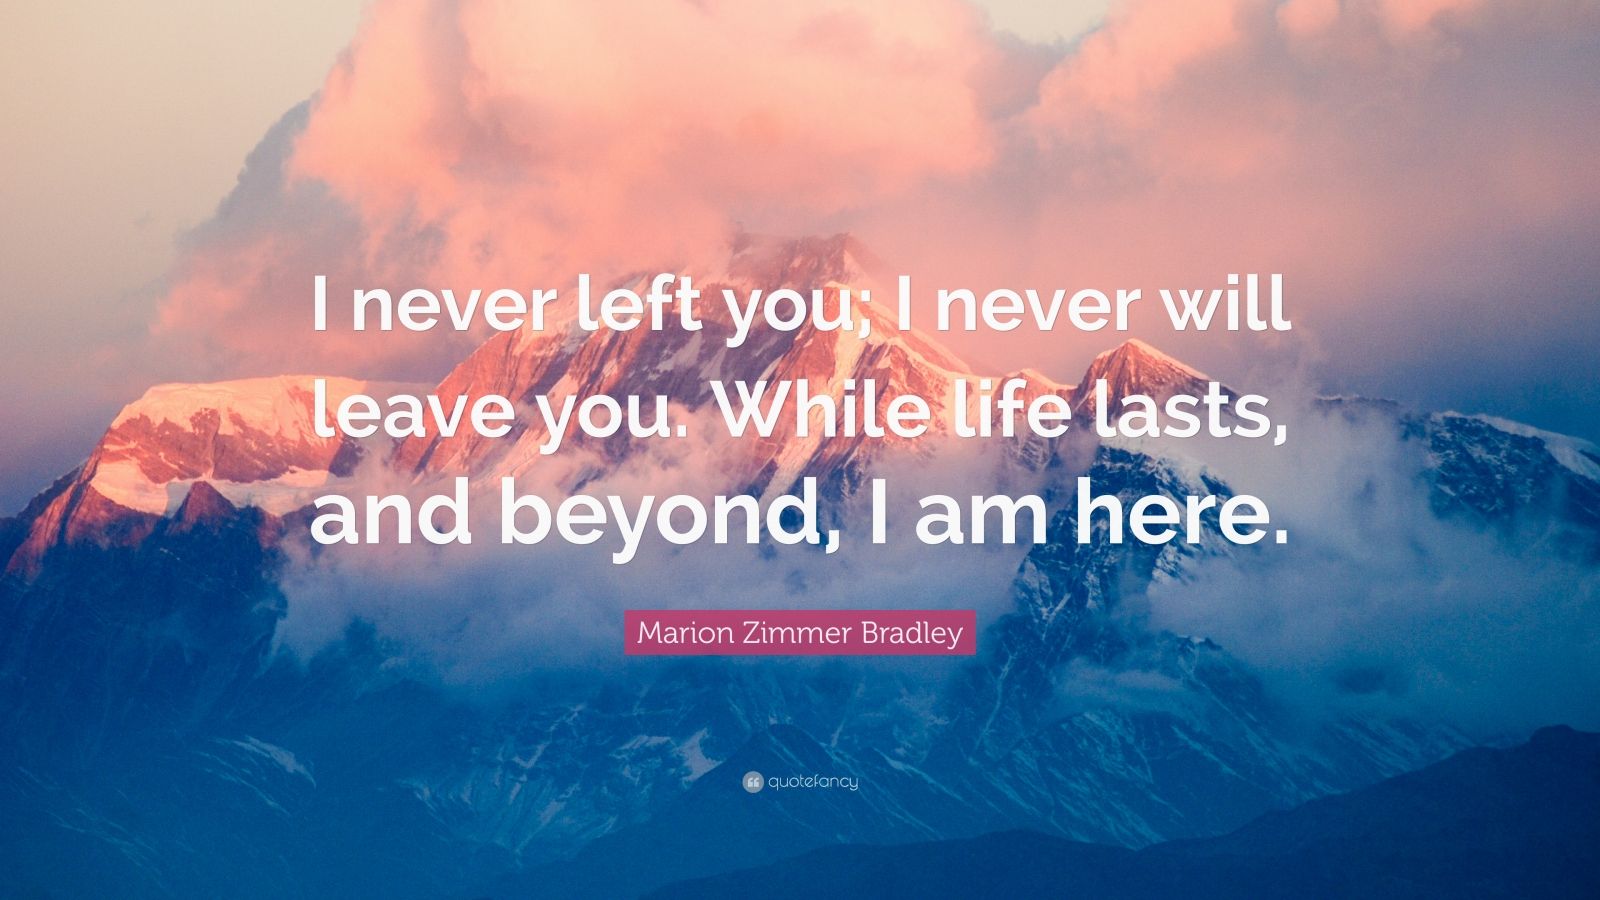 Marion Zimmer Bradley Quote: “I never left you; I never will leave you ...